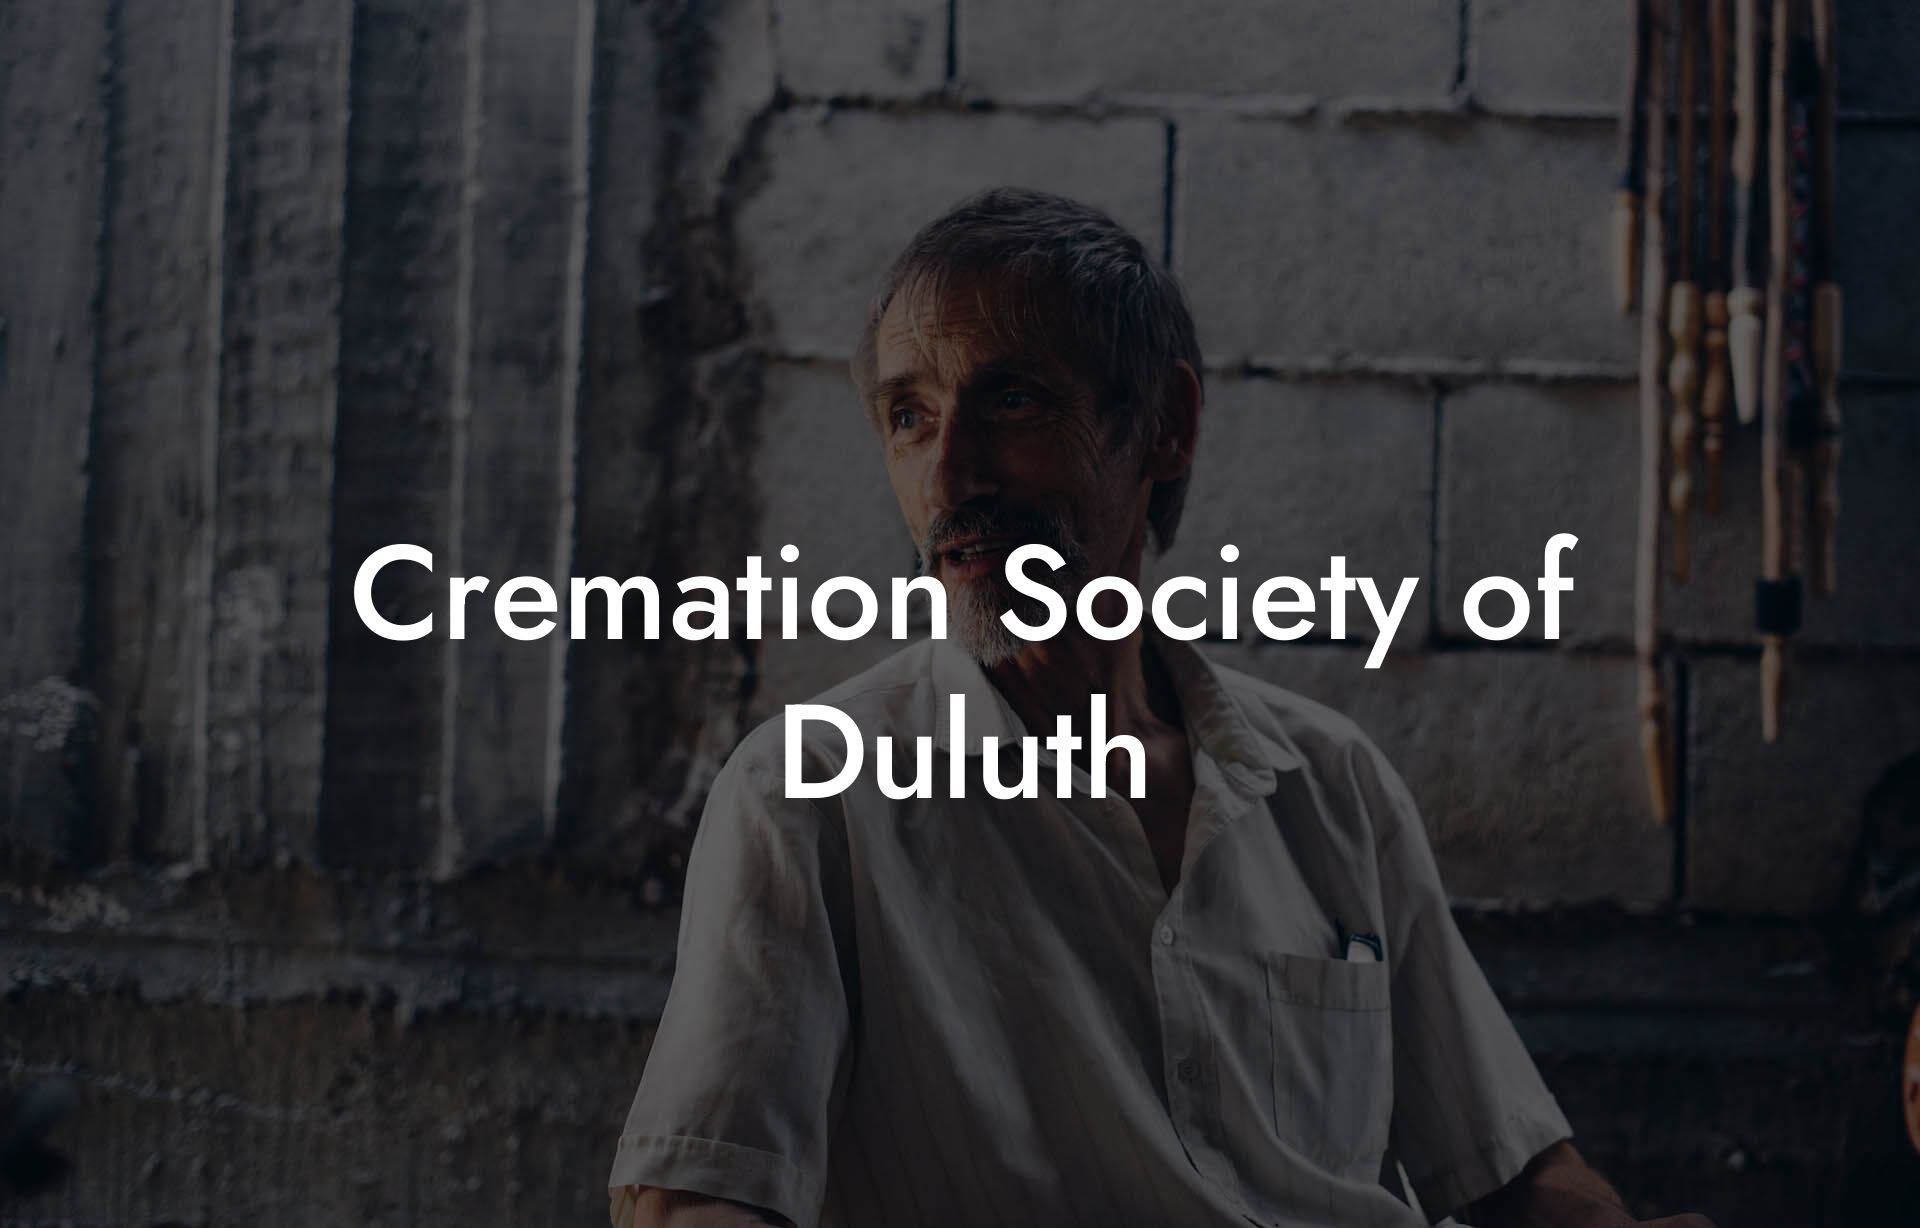 Cremation Society of Duluth